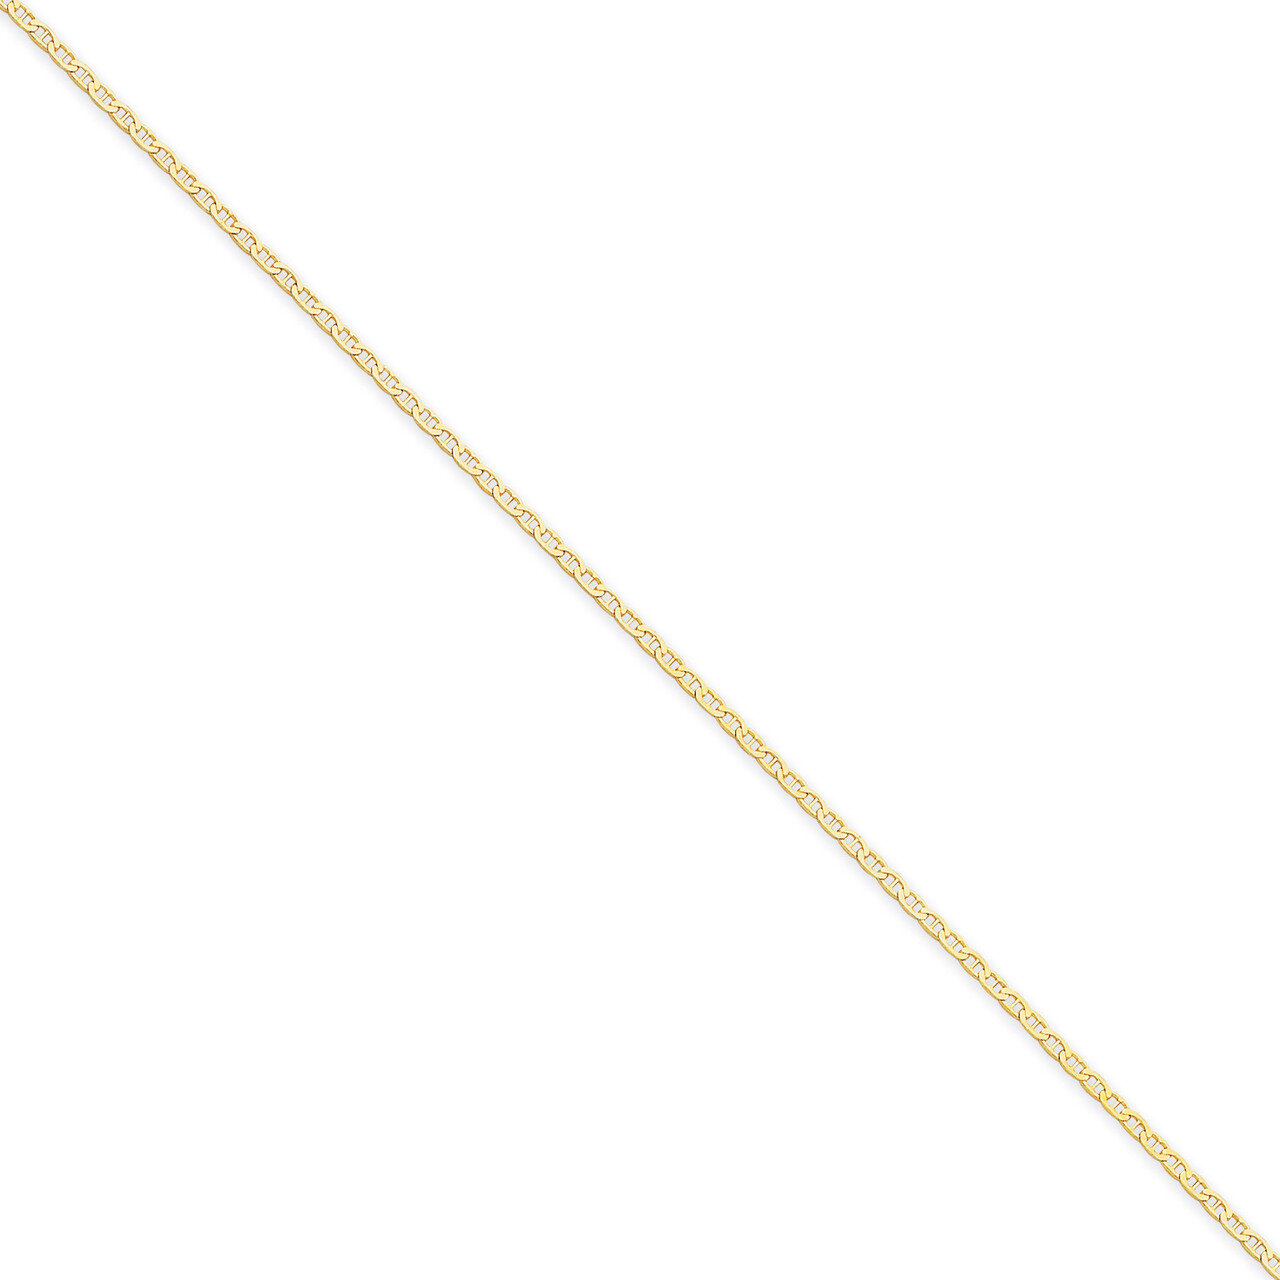 1.5mm Anchor Link Chain 18 Inch 14k Gold PEN50-18